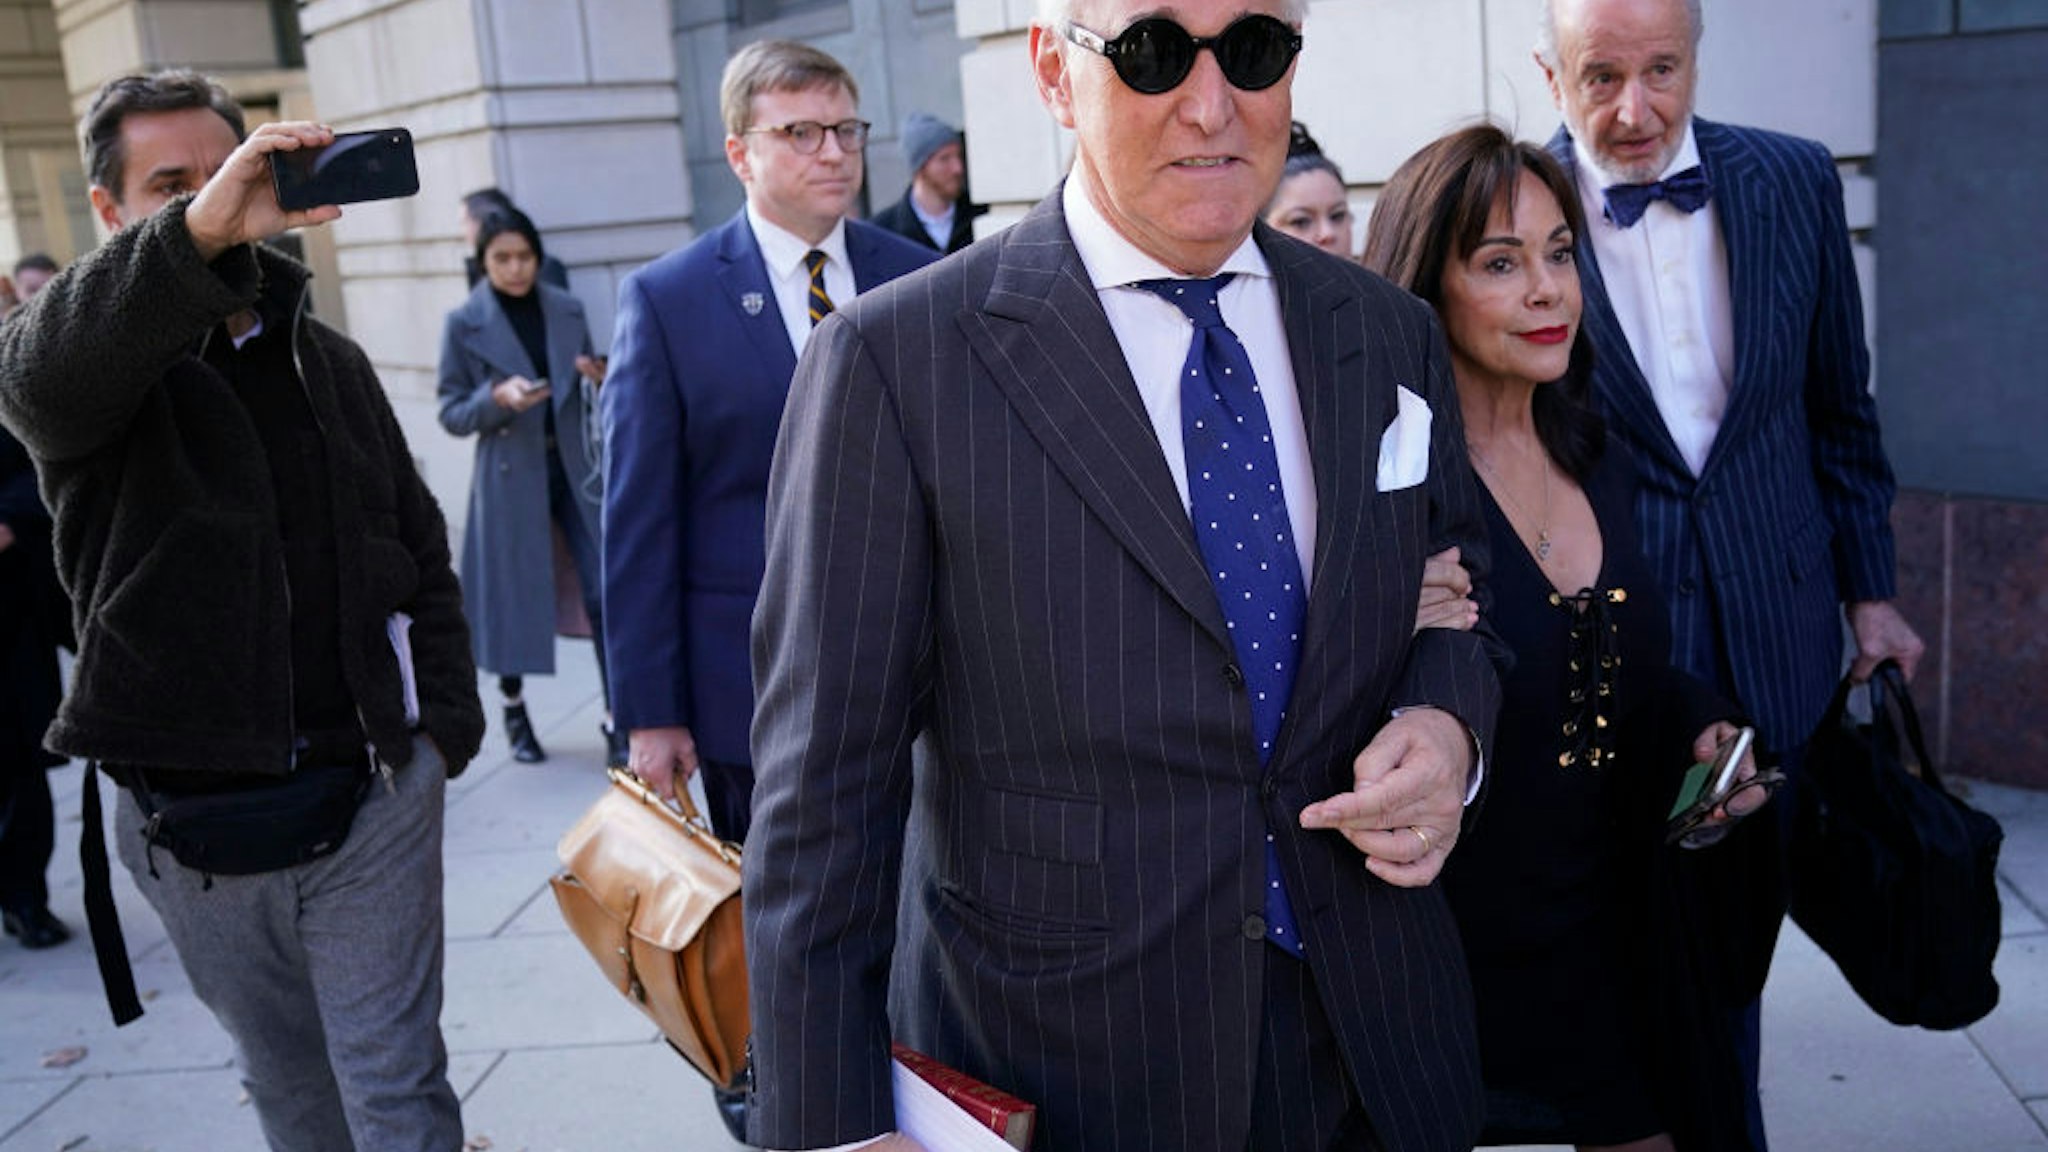 Former advisor to U.S. President Donald Trump, Roger Stone, departs the E. Barrett Prettyman United States Courthouse with his wife Nydia after being found guilty of obstructing a congressional investigation into Russia’s interference in the 2016 election on November 15, 2019 in Washington, DC.